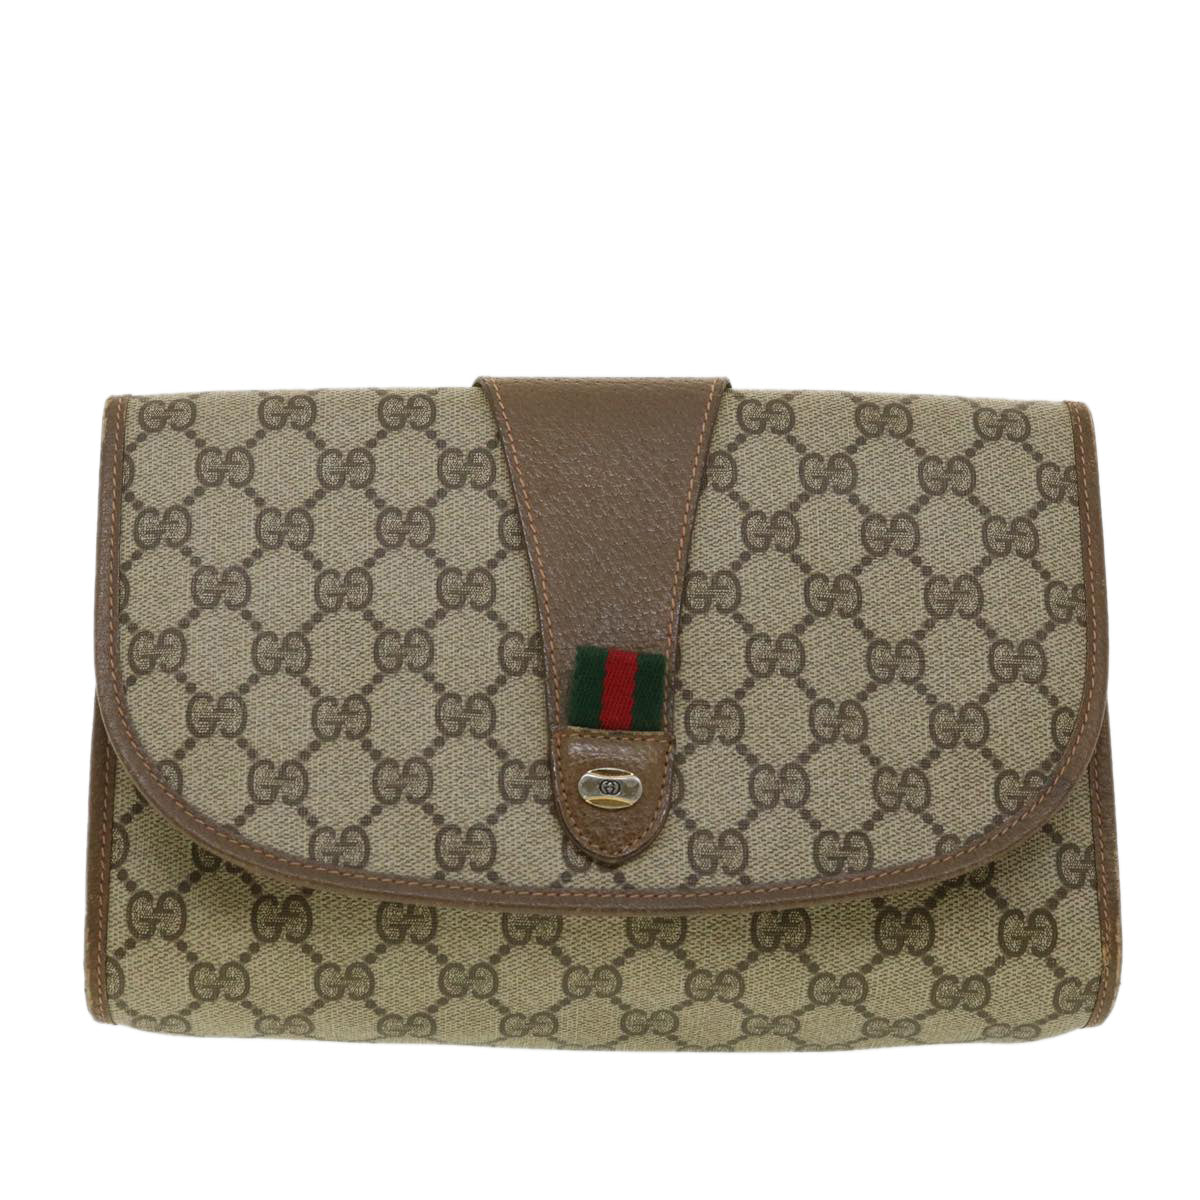 GUCCI GG Canvas Web Sherry Line Clutch Bag Beige Red Green Auth ny139